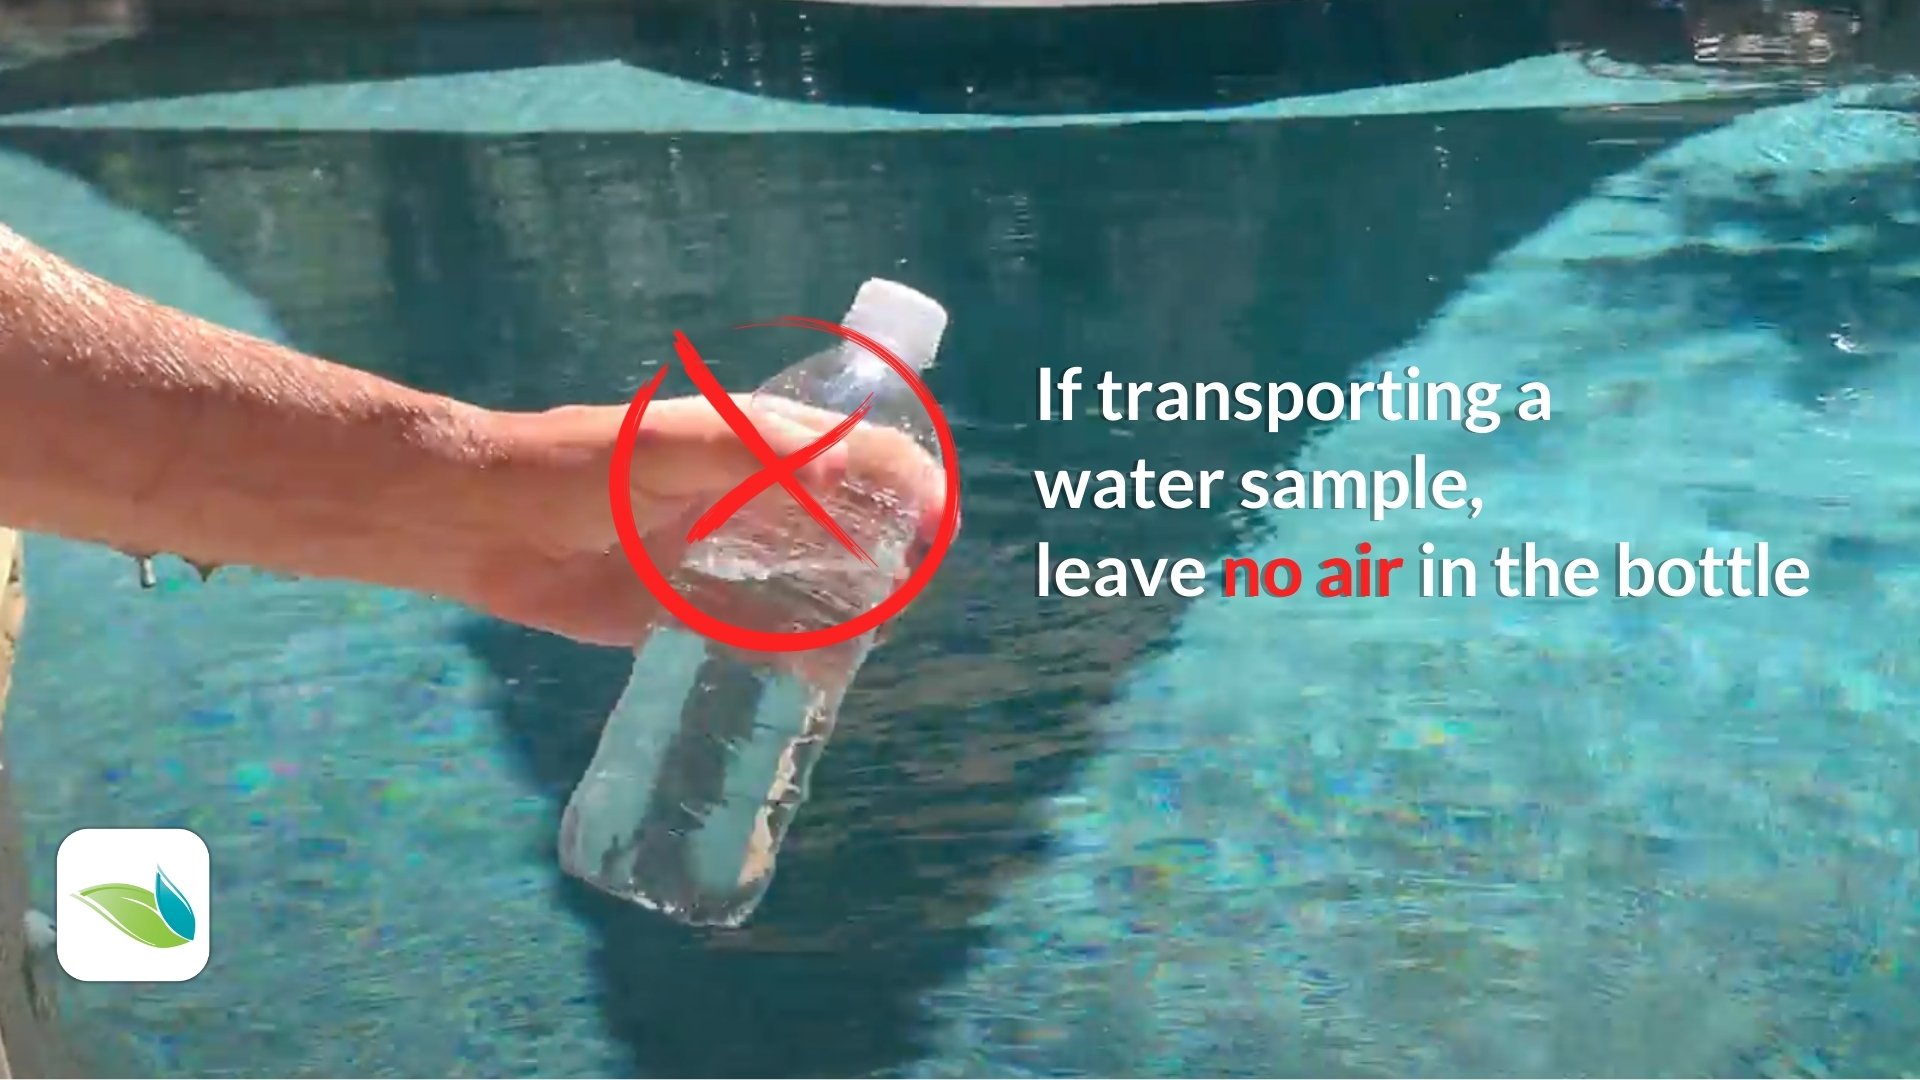 A water sample in a bottle with air in it, crossed out saying to leave no air in the bottle when collecting a water sample for testing